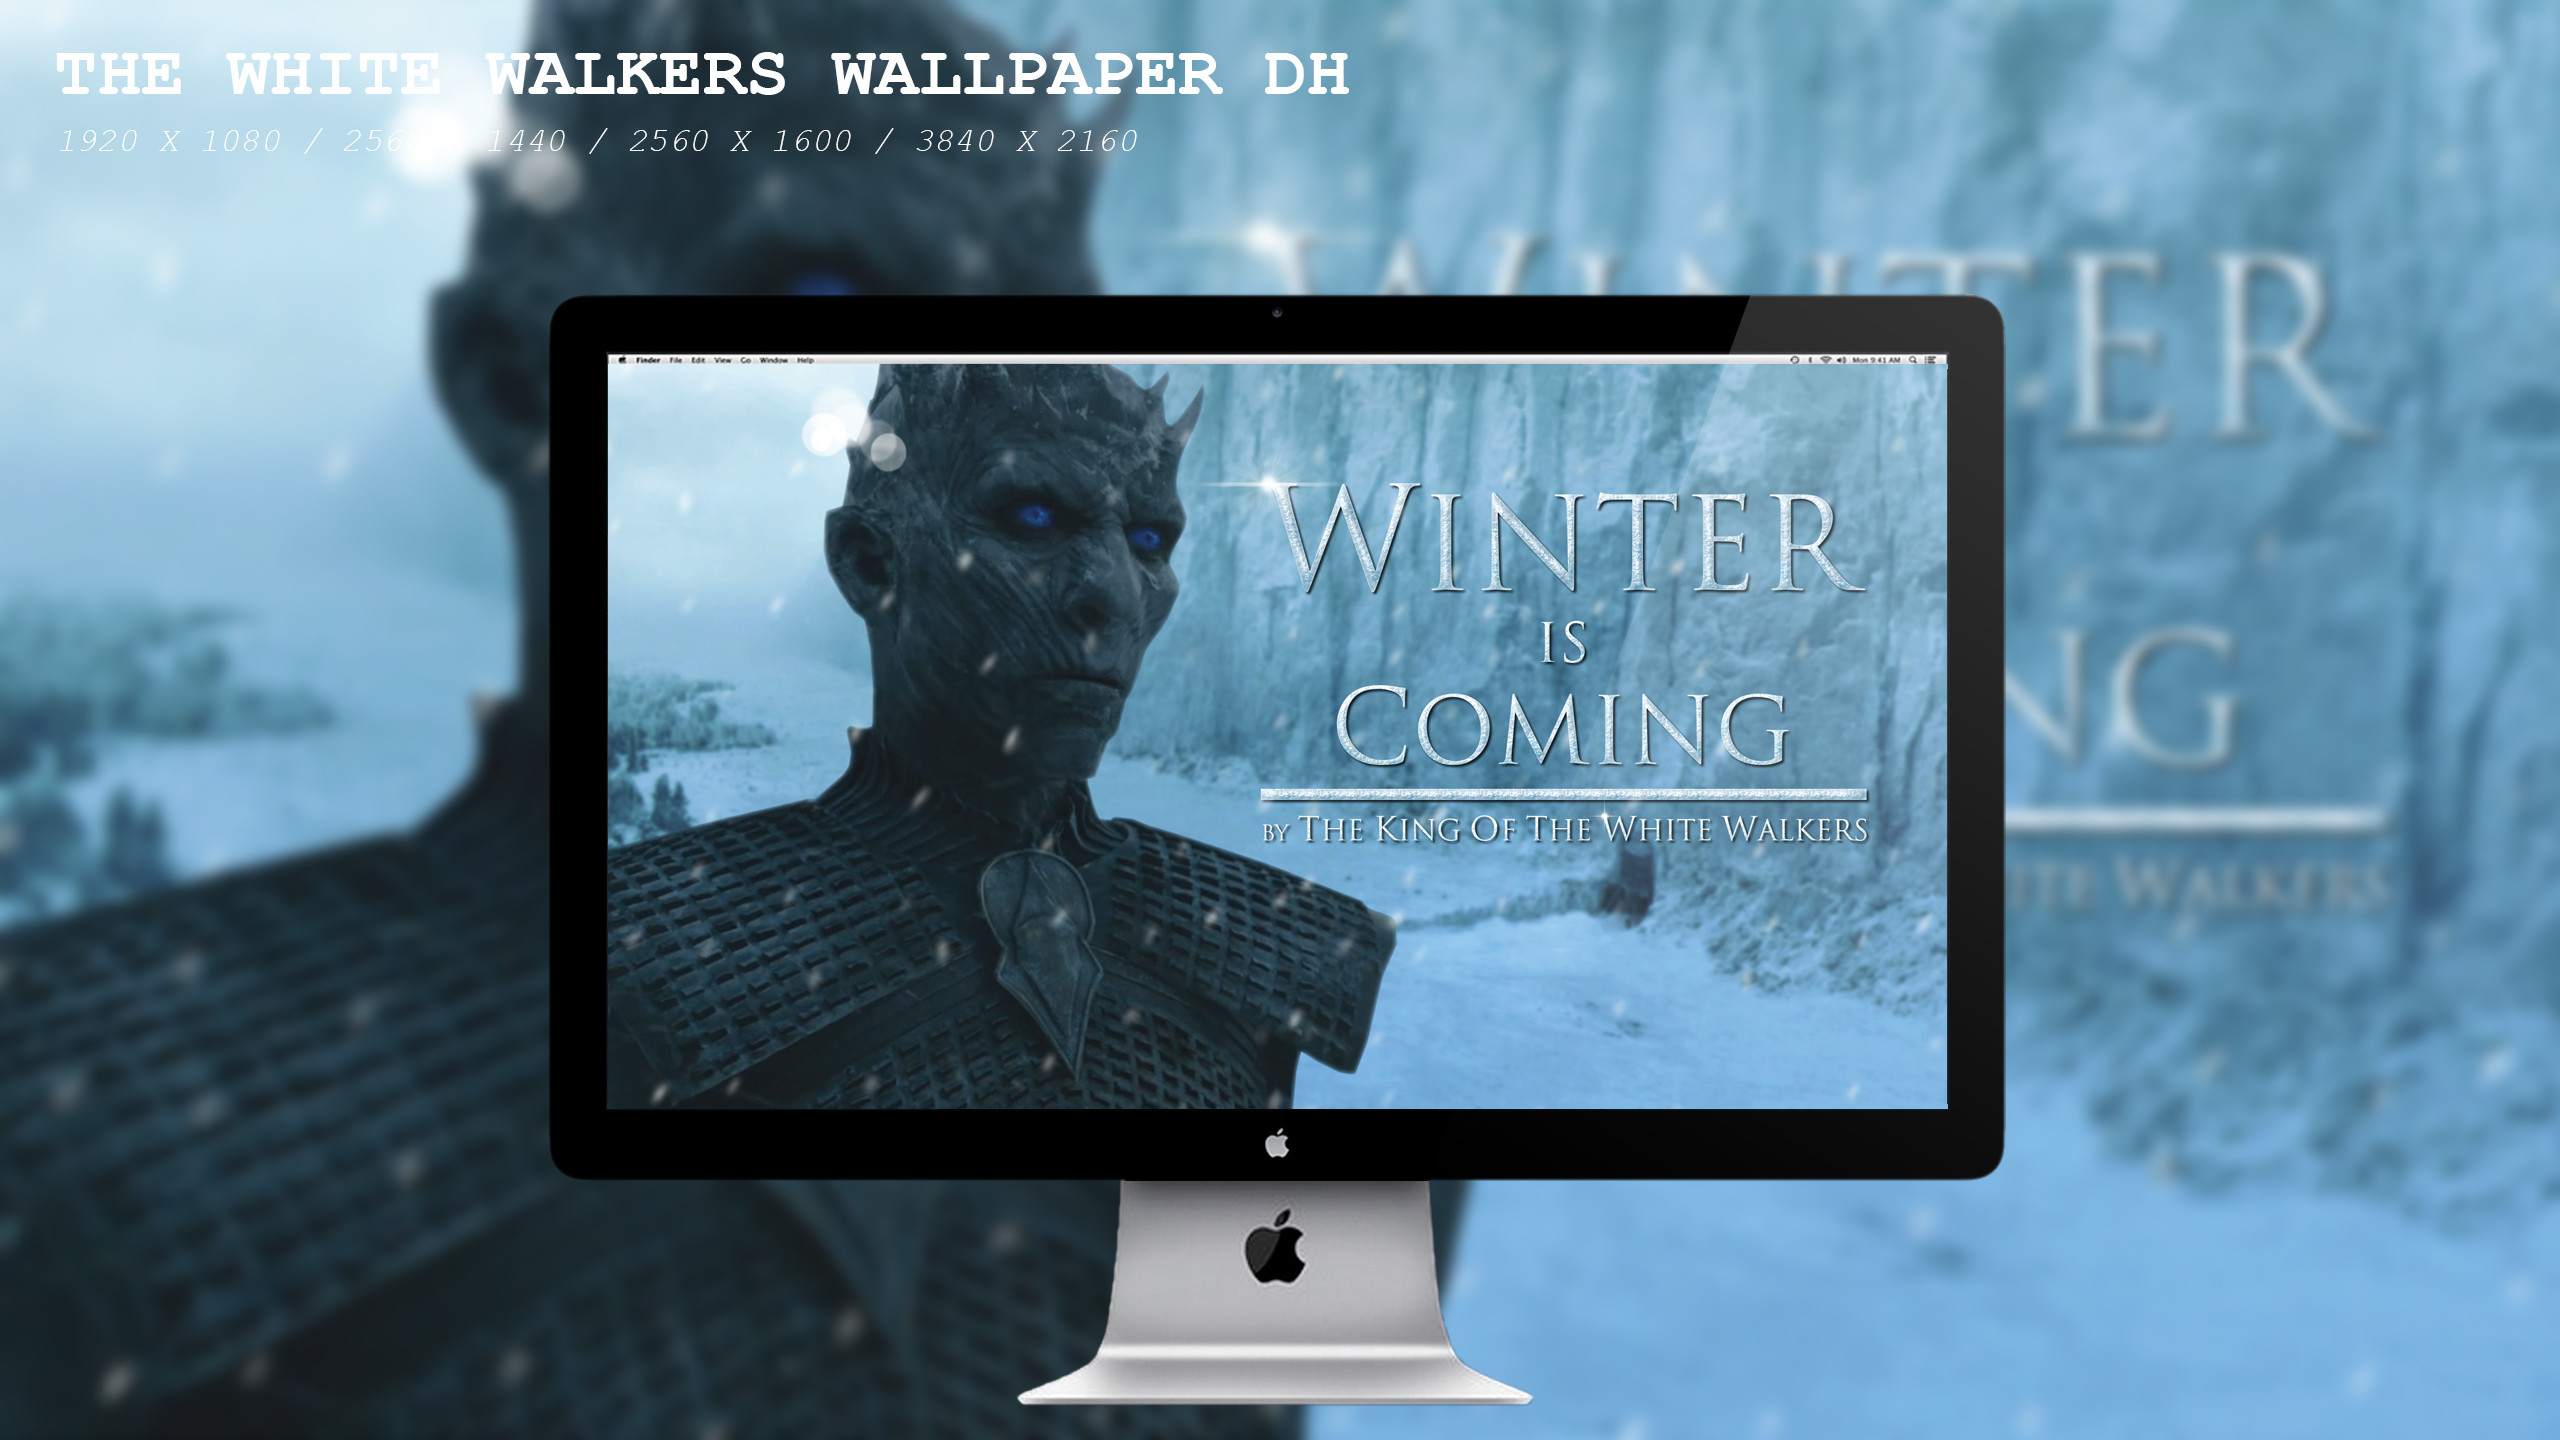 The White Walkers wallpaper DH by BeAware8